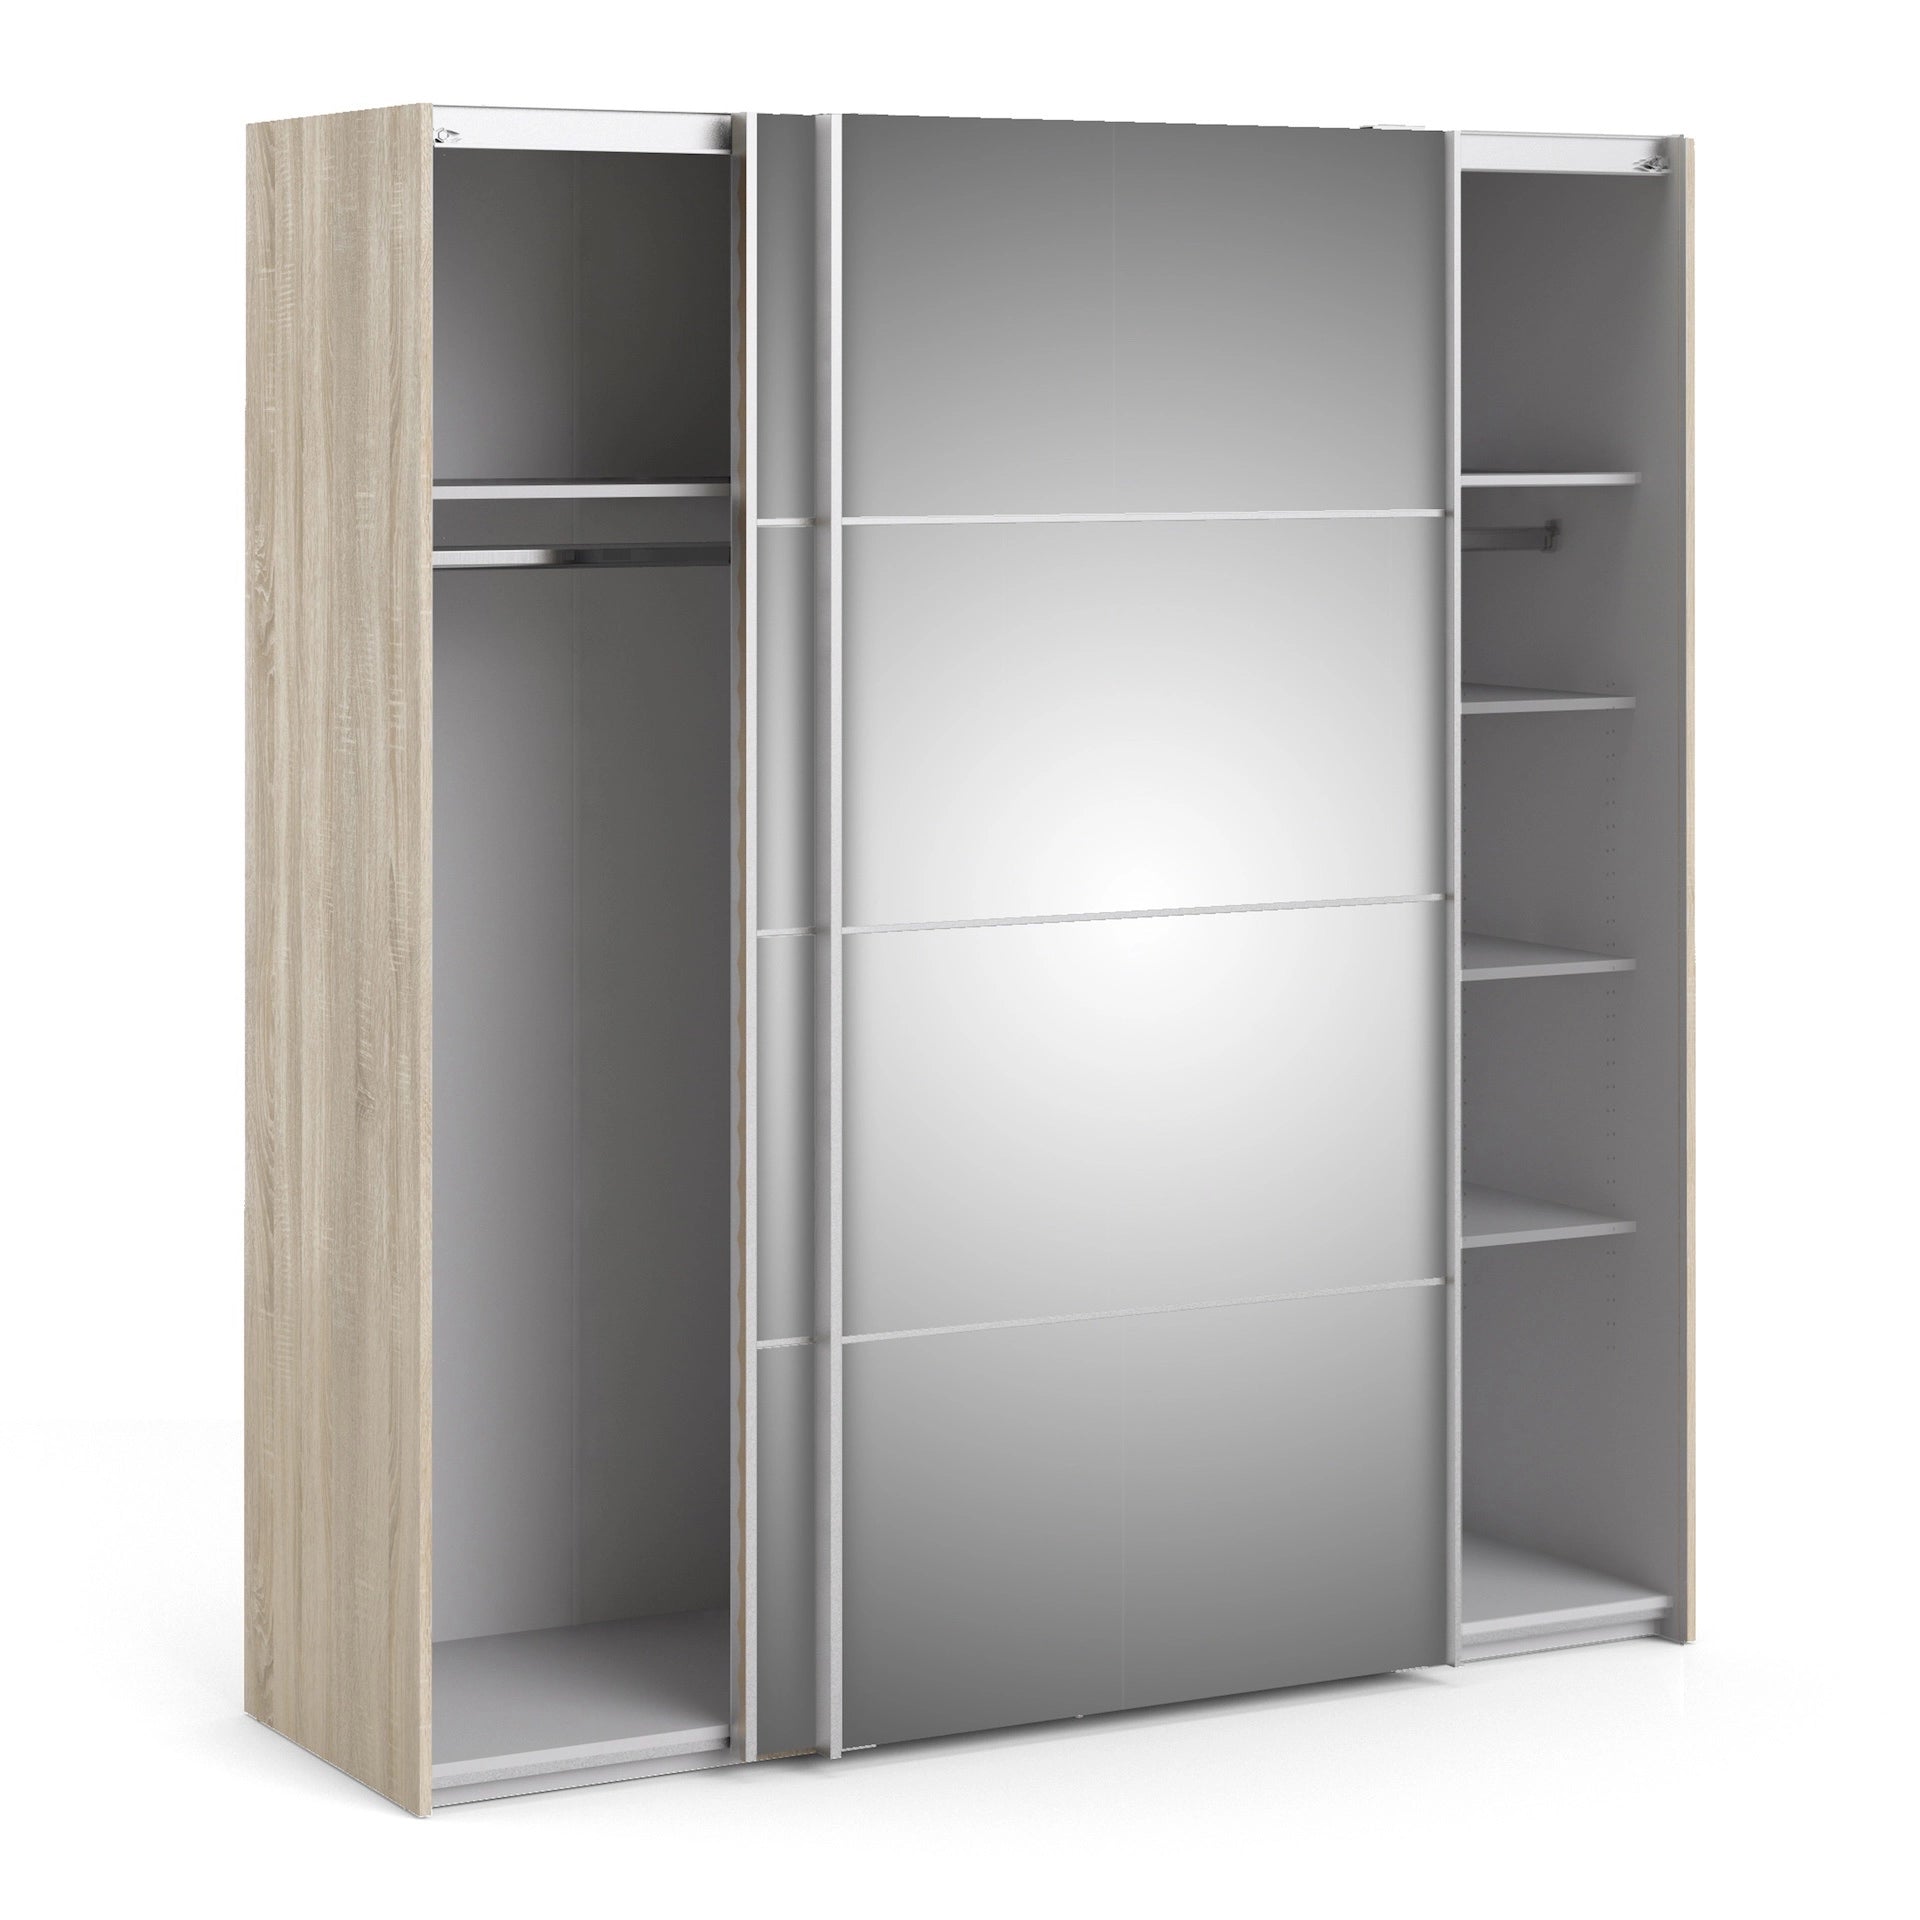 Furniture To Go Verona Sliding Wardrobe 180cm in Oak with Mirror Doors with 5 Shelves